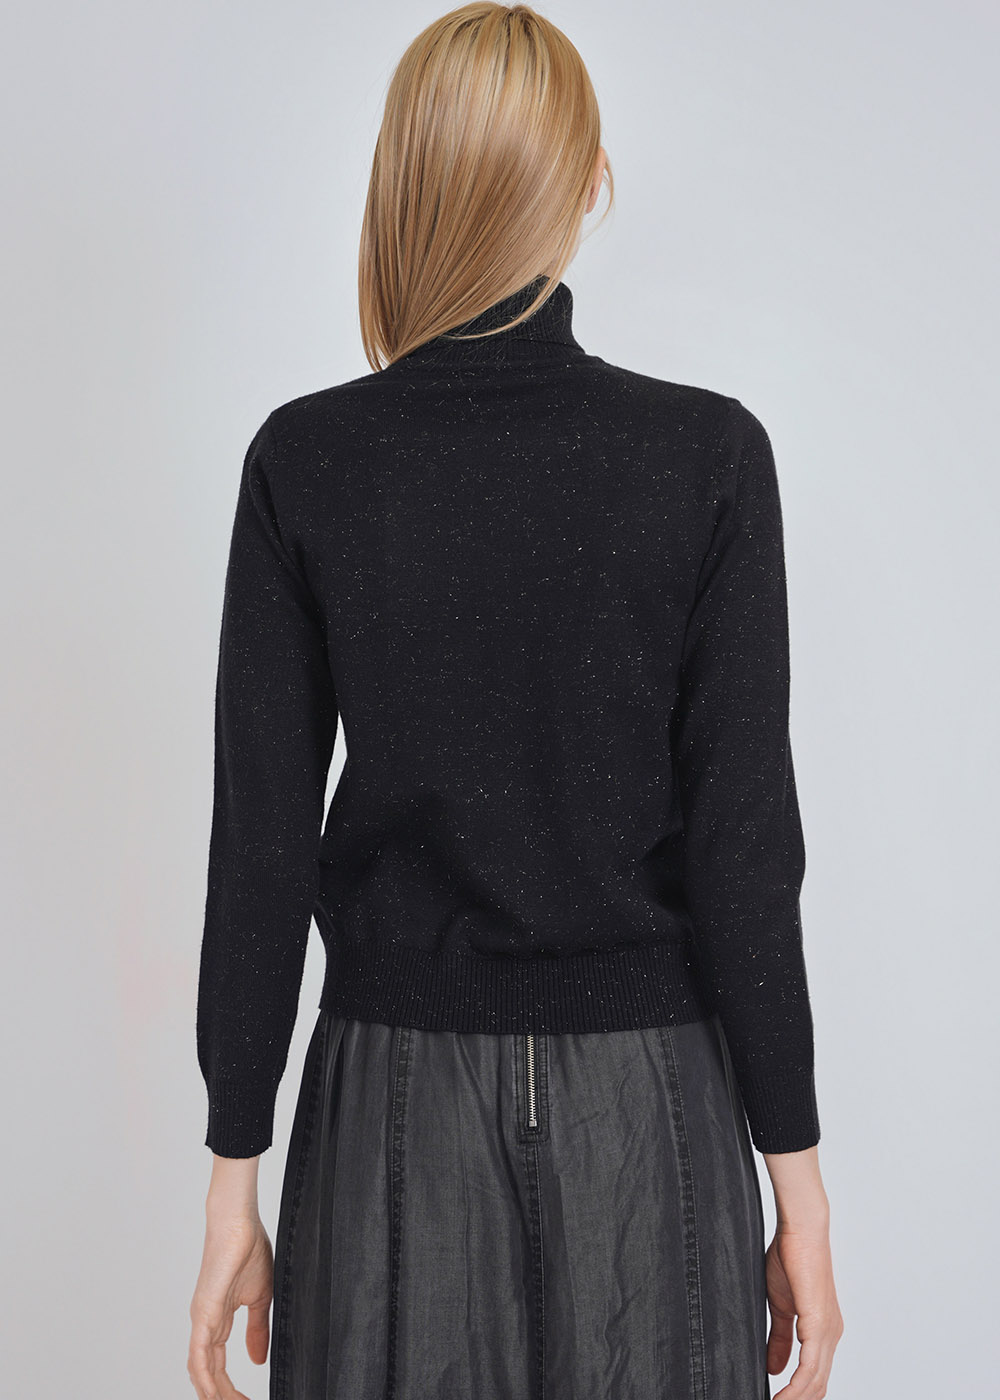 Starry Night: Black Knit Sweater with High Neck